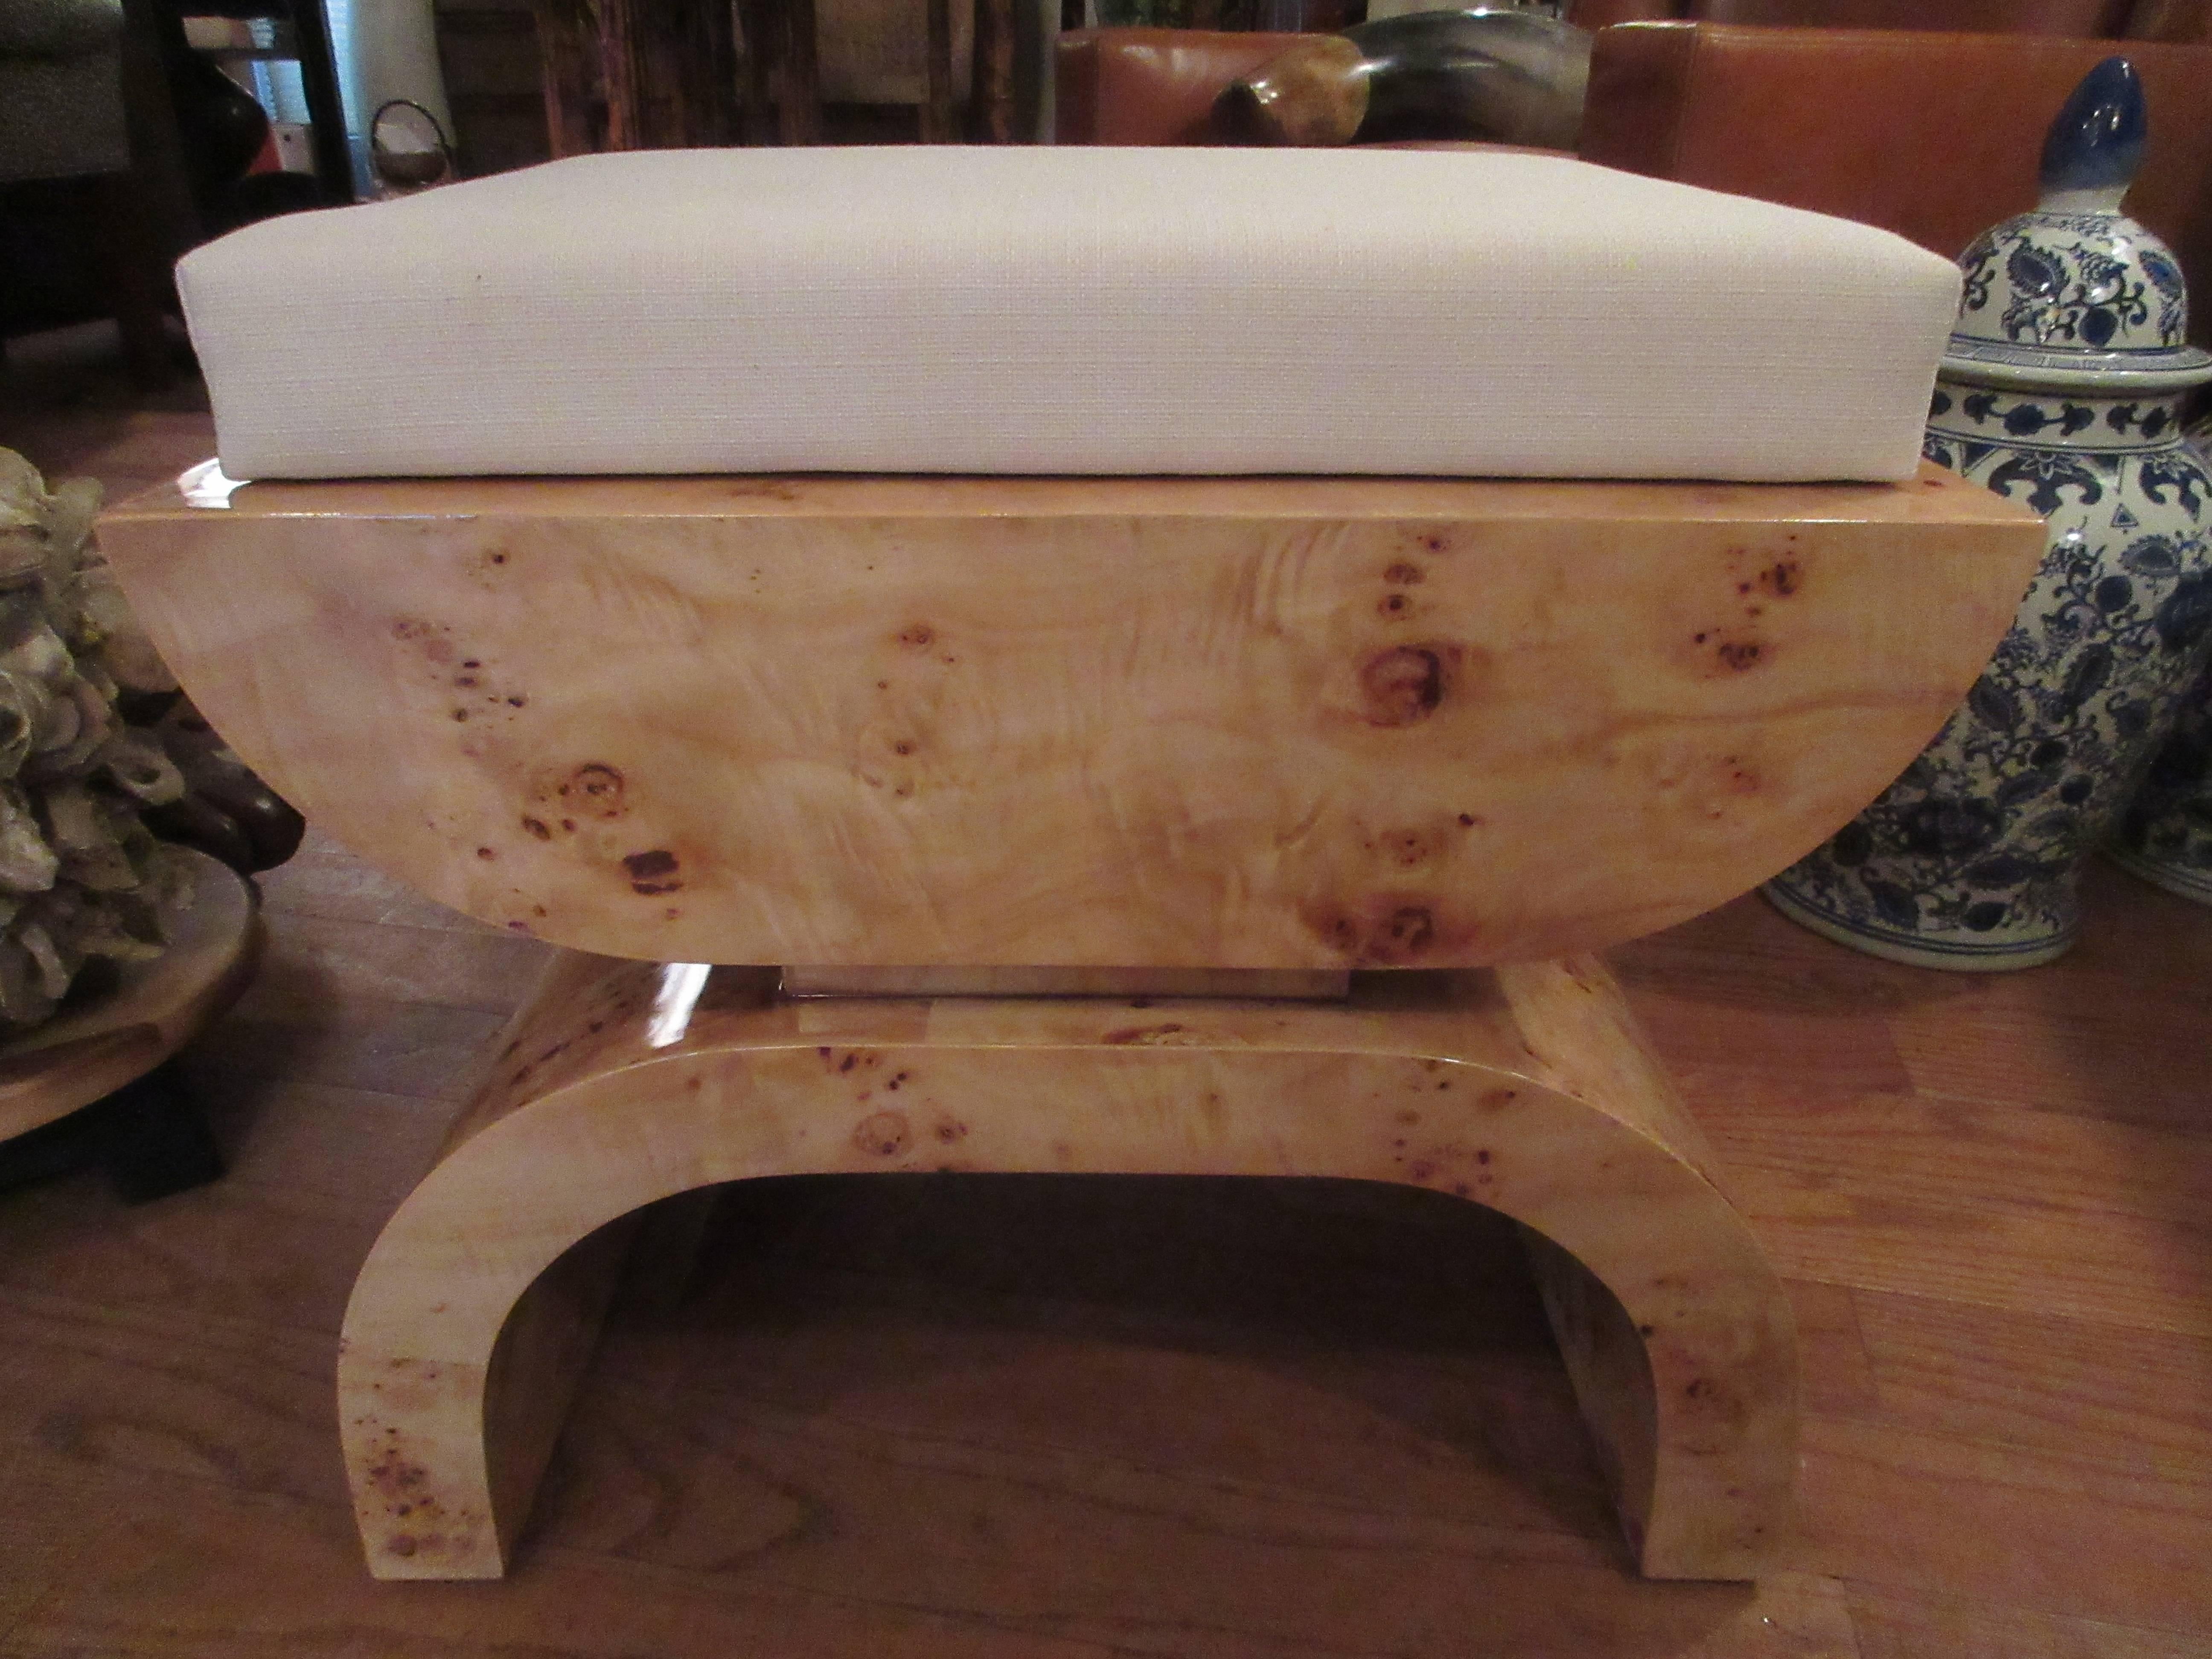 Pair of Asian inspired bird's-eye maple stools or small benches. Art Deco in style, upholstered cushion tops in a cream linen. Heavy construction, solid through the whole frame.